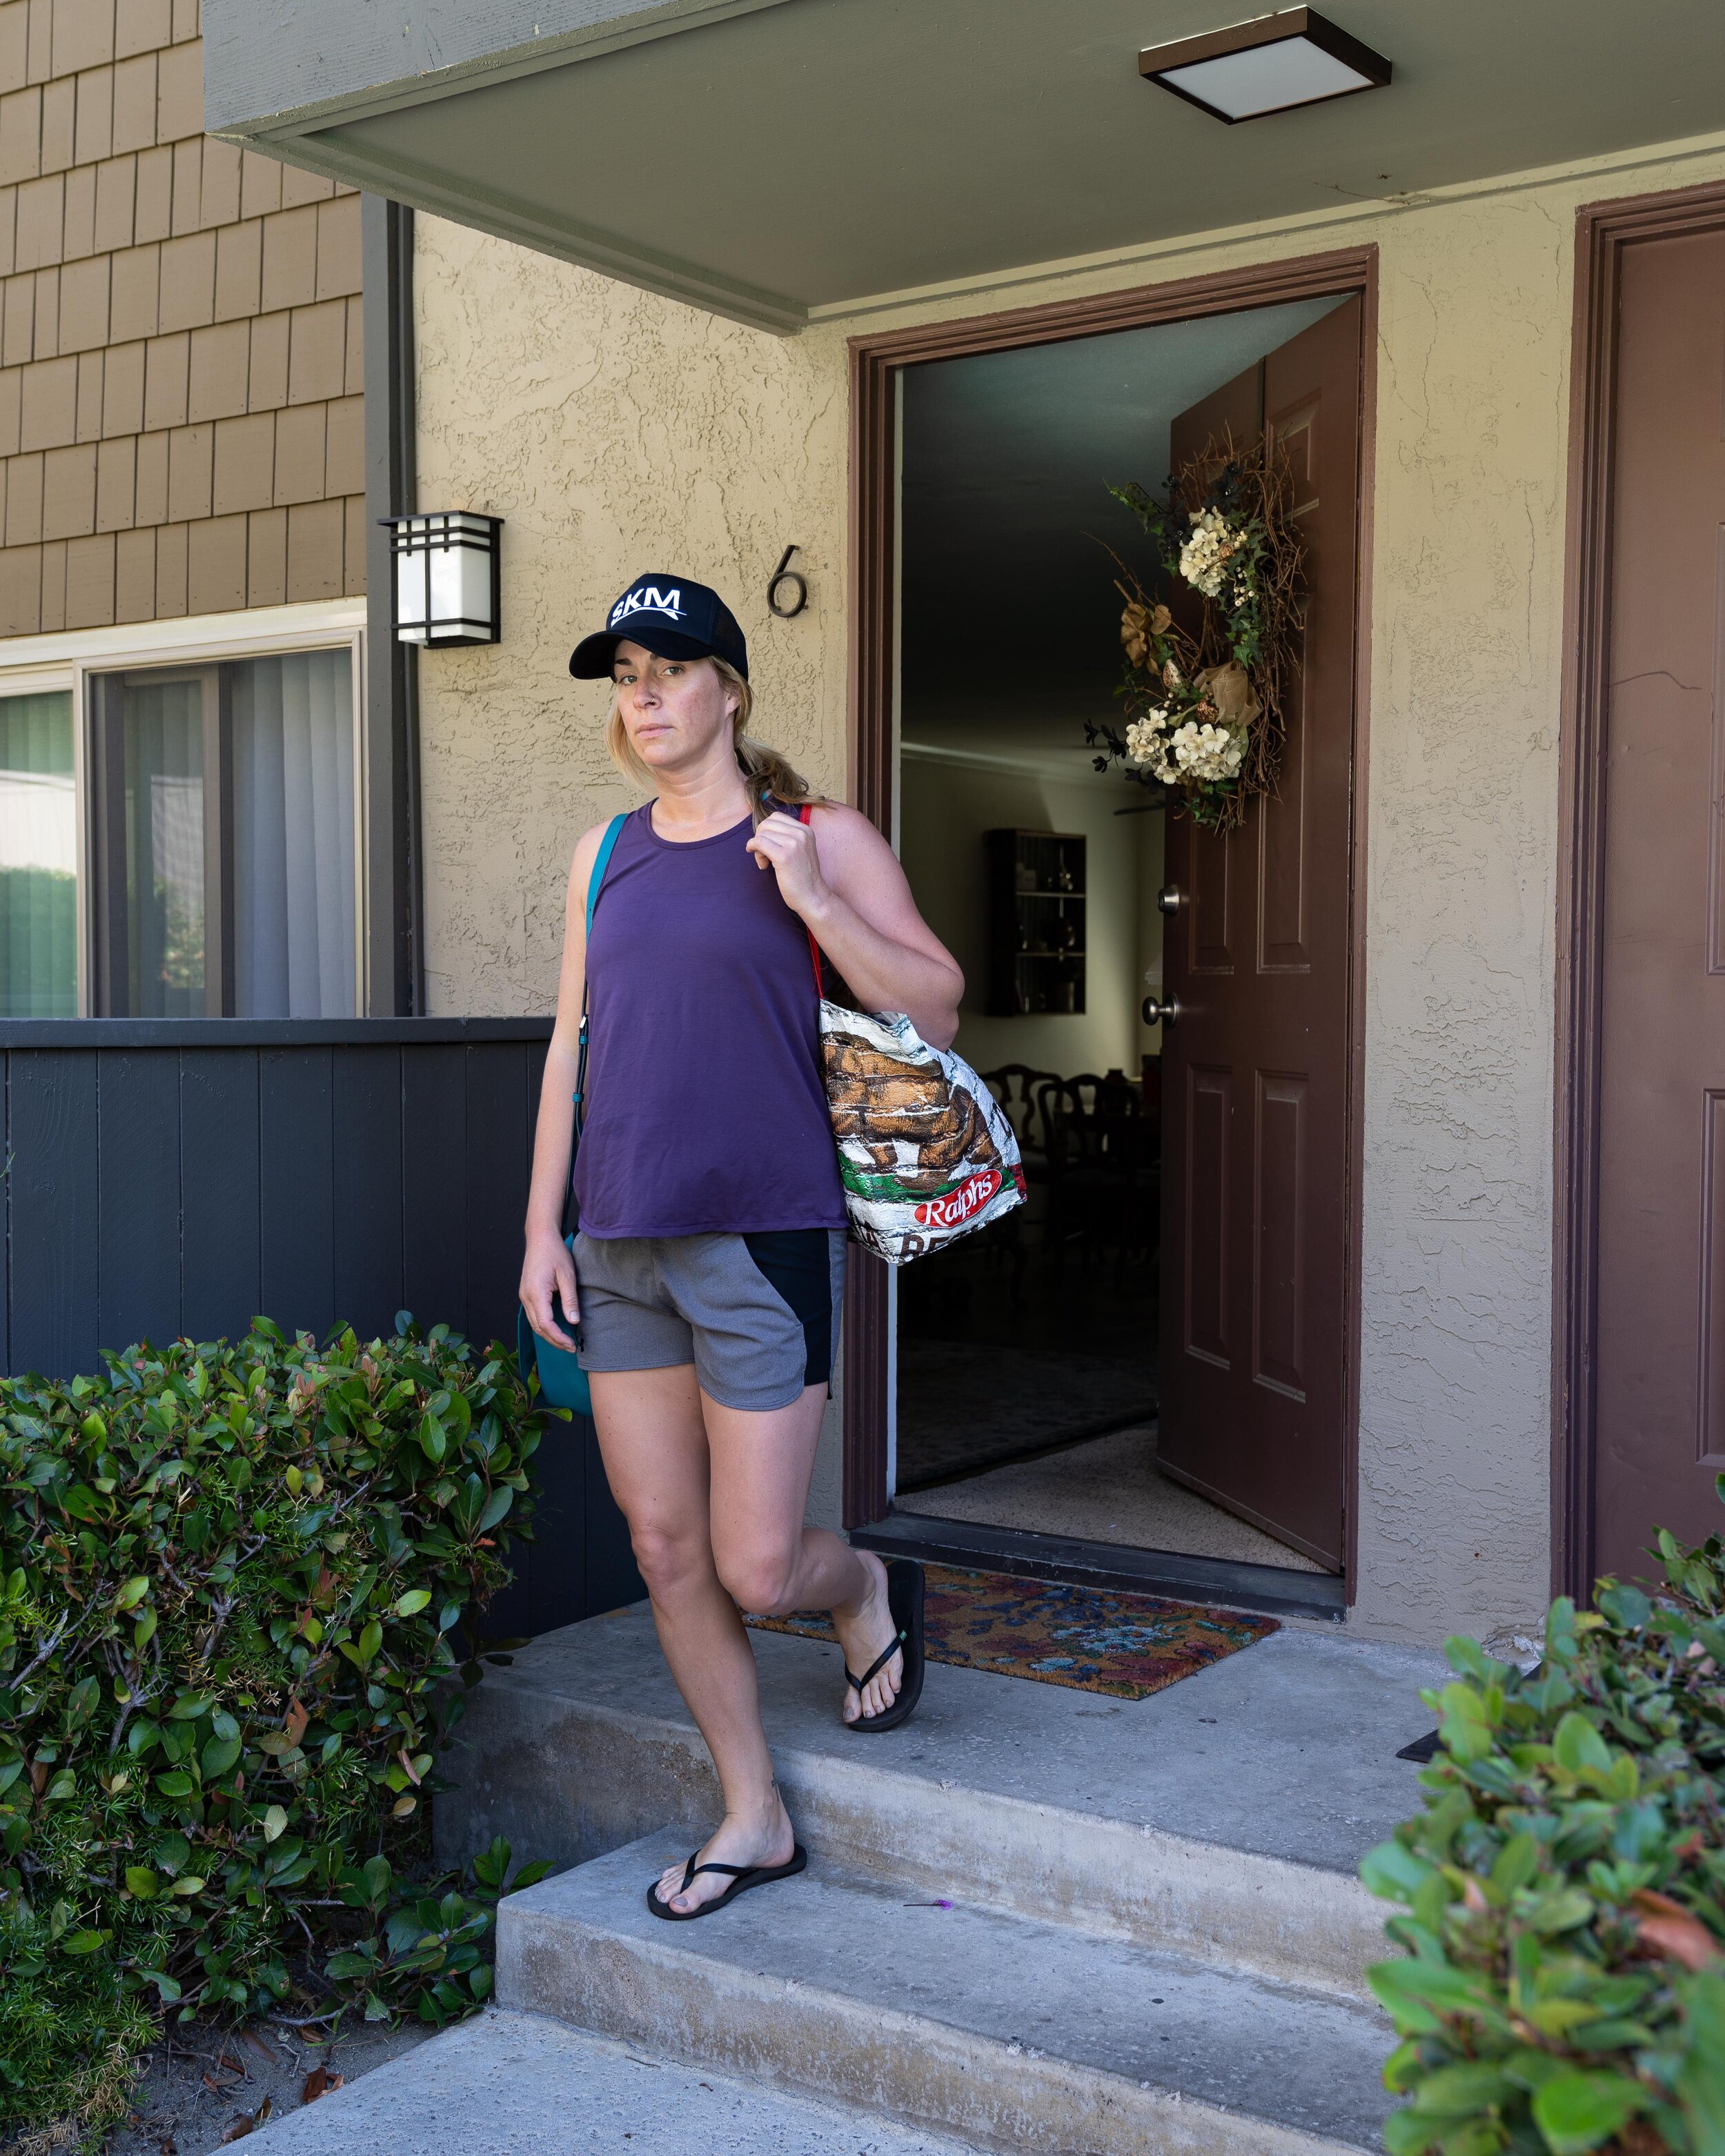  “I’m headed to go help with the kids again today. Be back around 6.” - Brooke | 05/06/20 (Solana Beach, CA) 